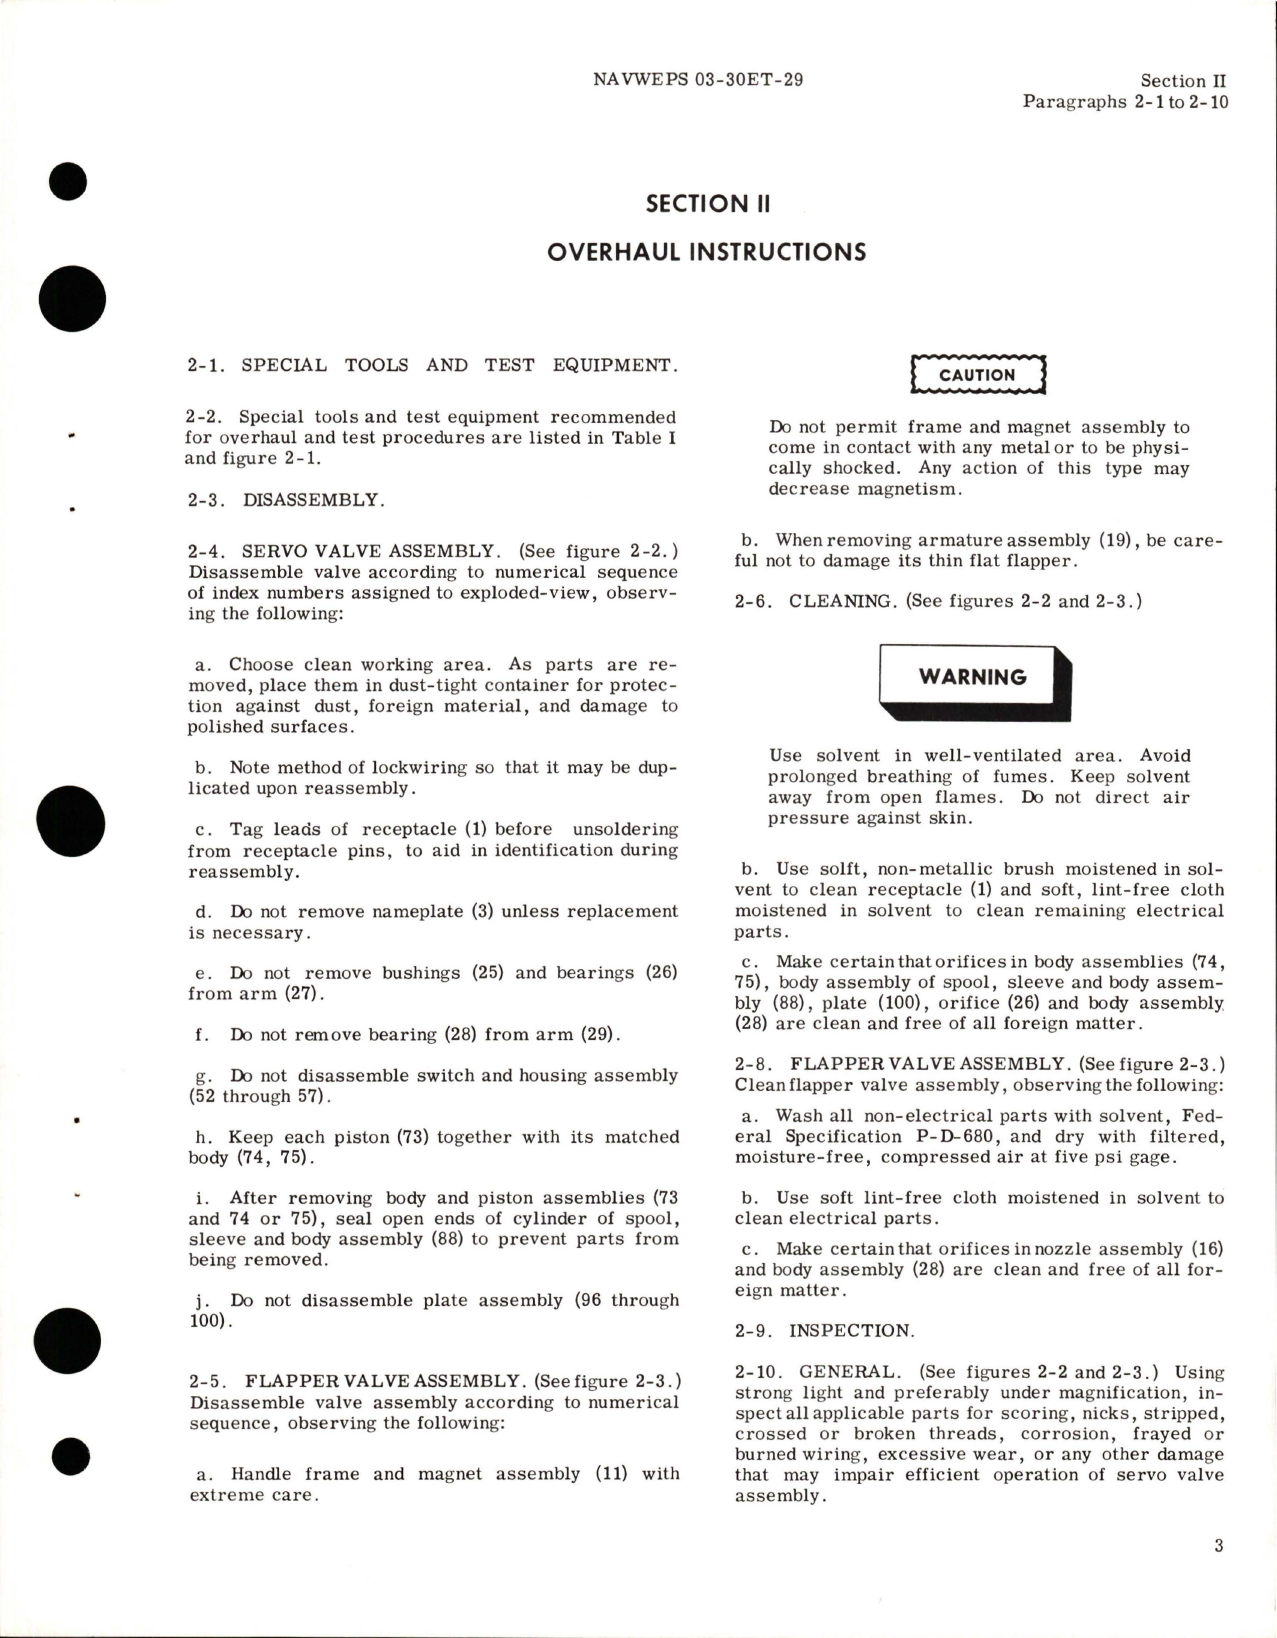 Sample page 7 from AirCorps Library document: Overhaul Instructions for Hydraulic Servo Valve Assembly - Part 100450 